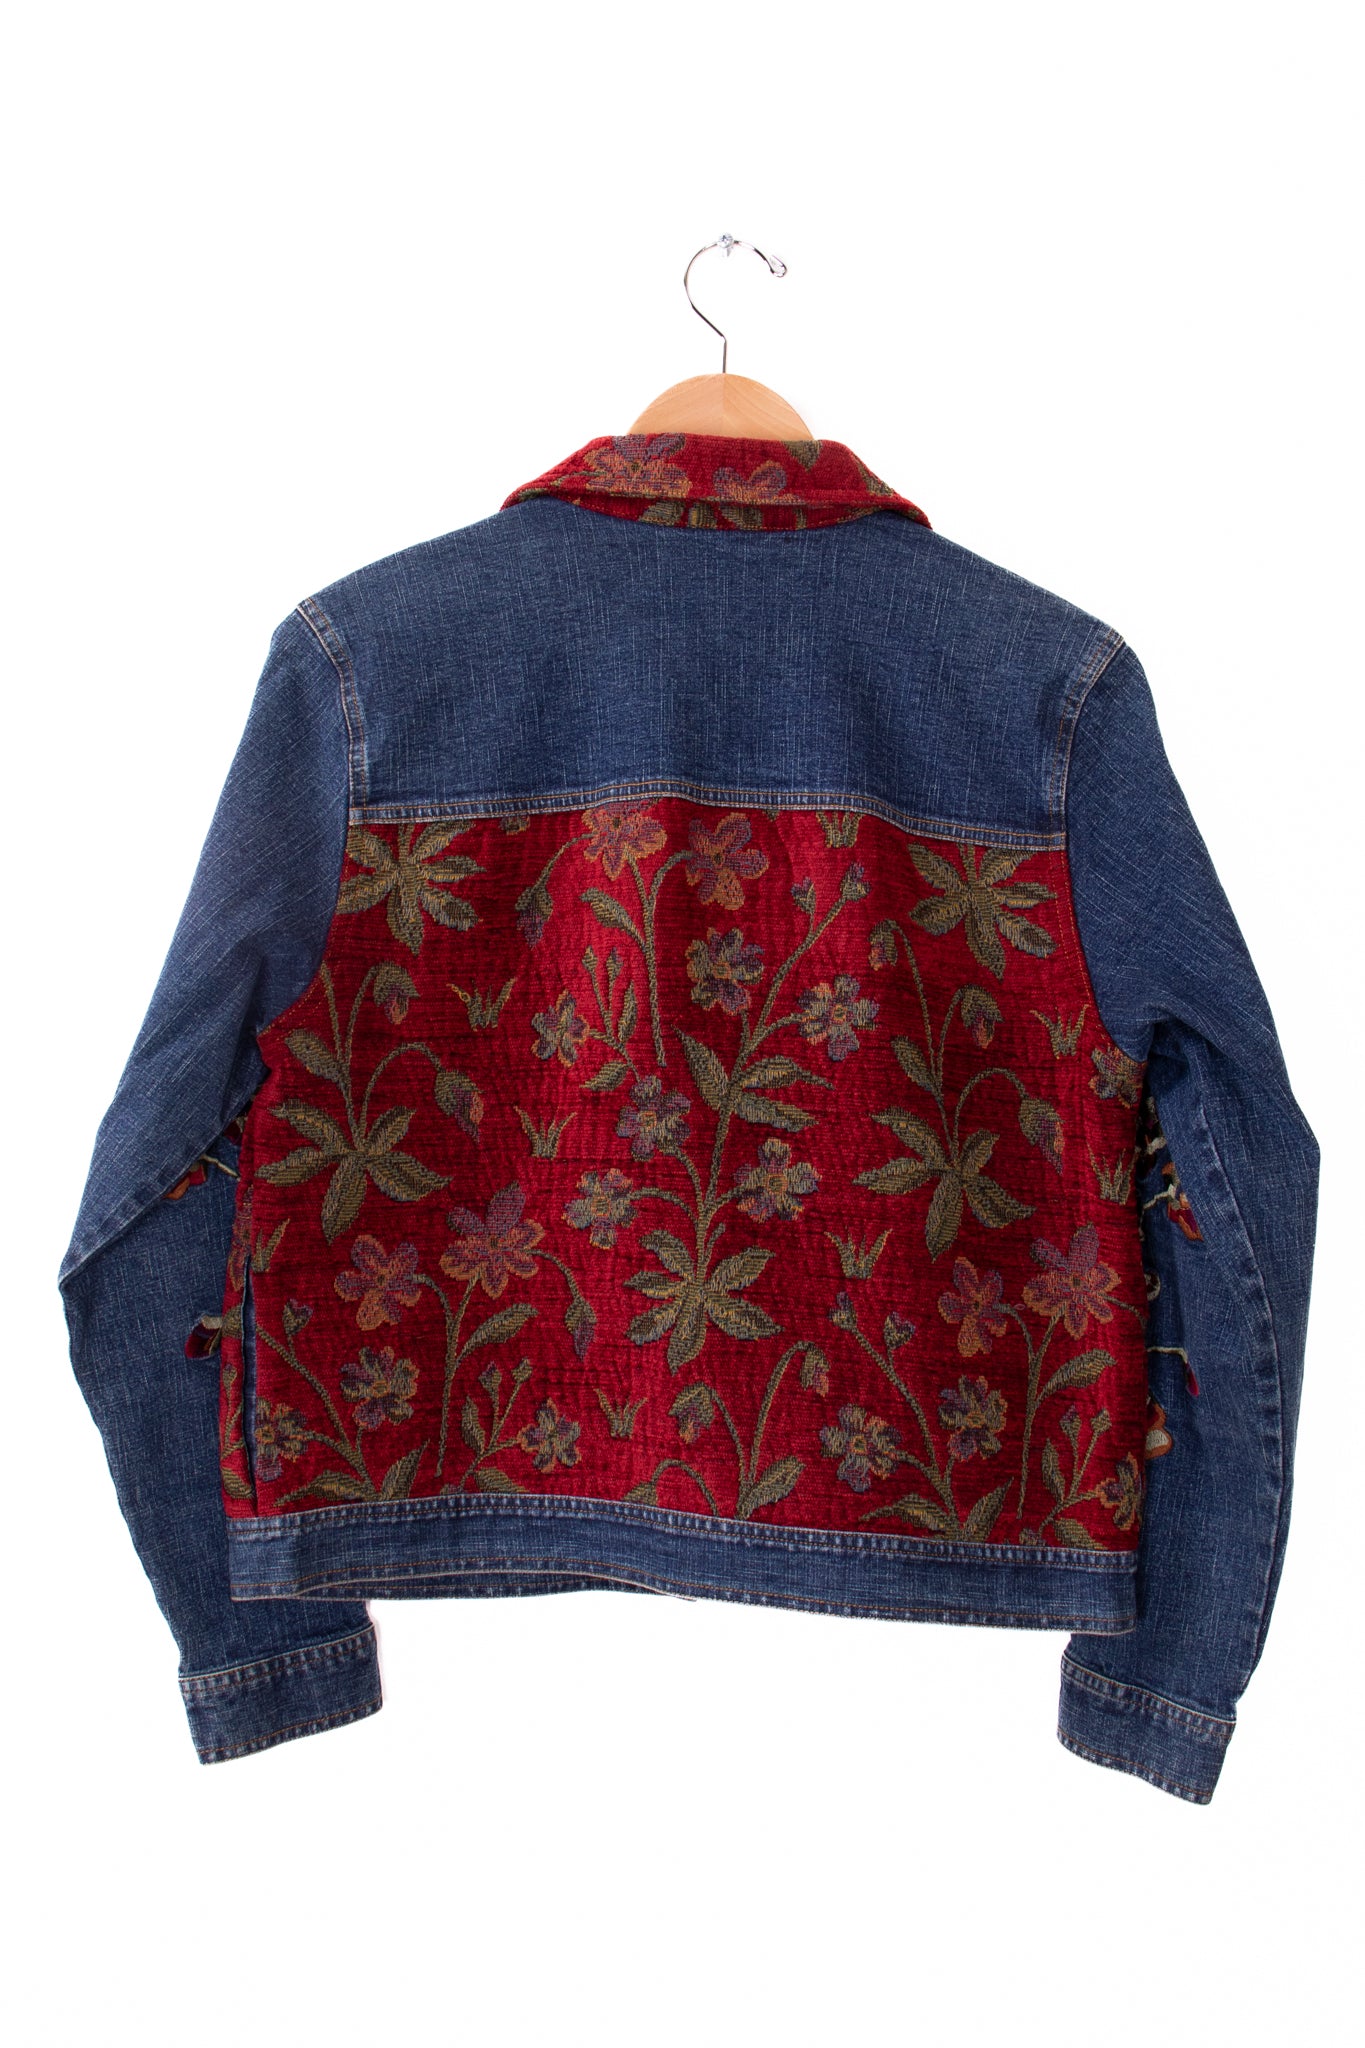 Carol Anderson Collection Red Floral Tapestry Denim Jacket